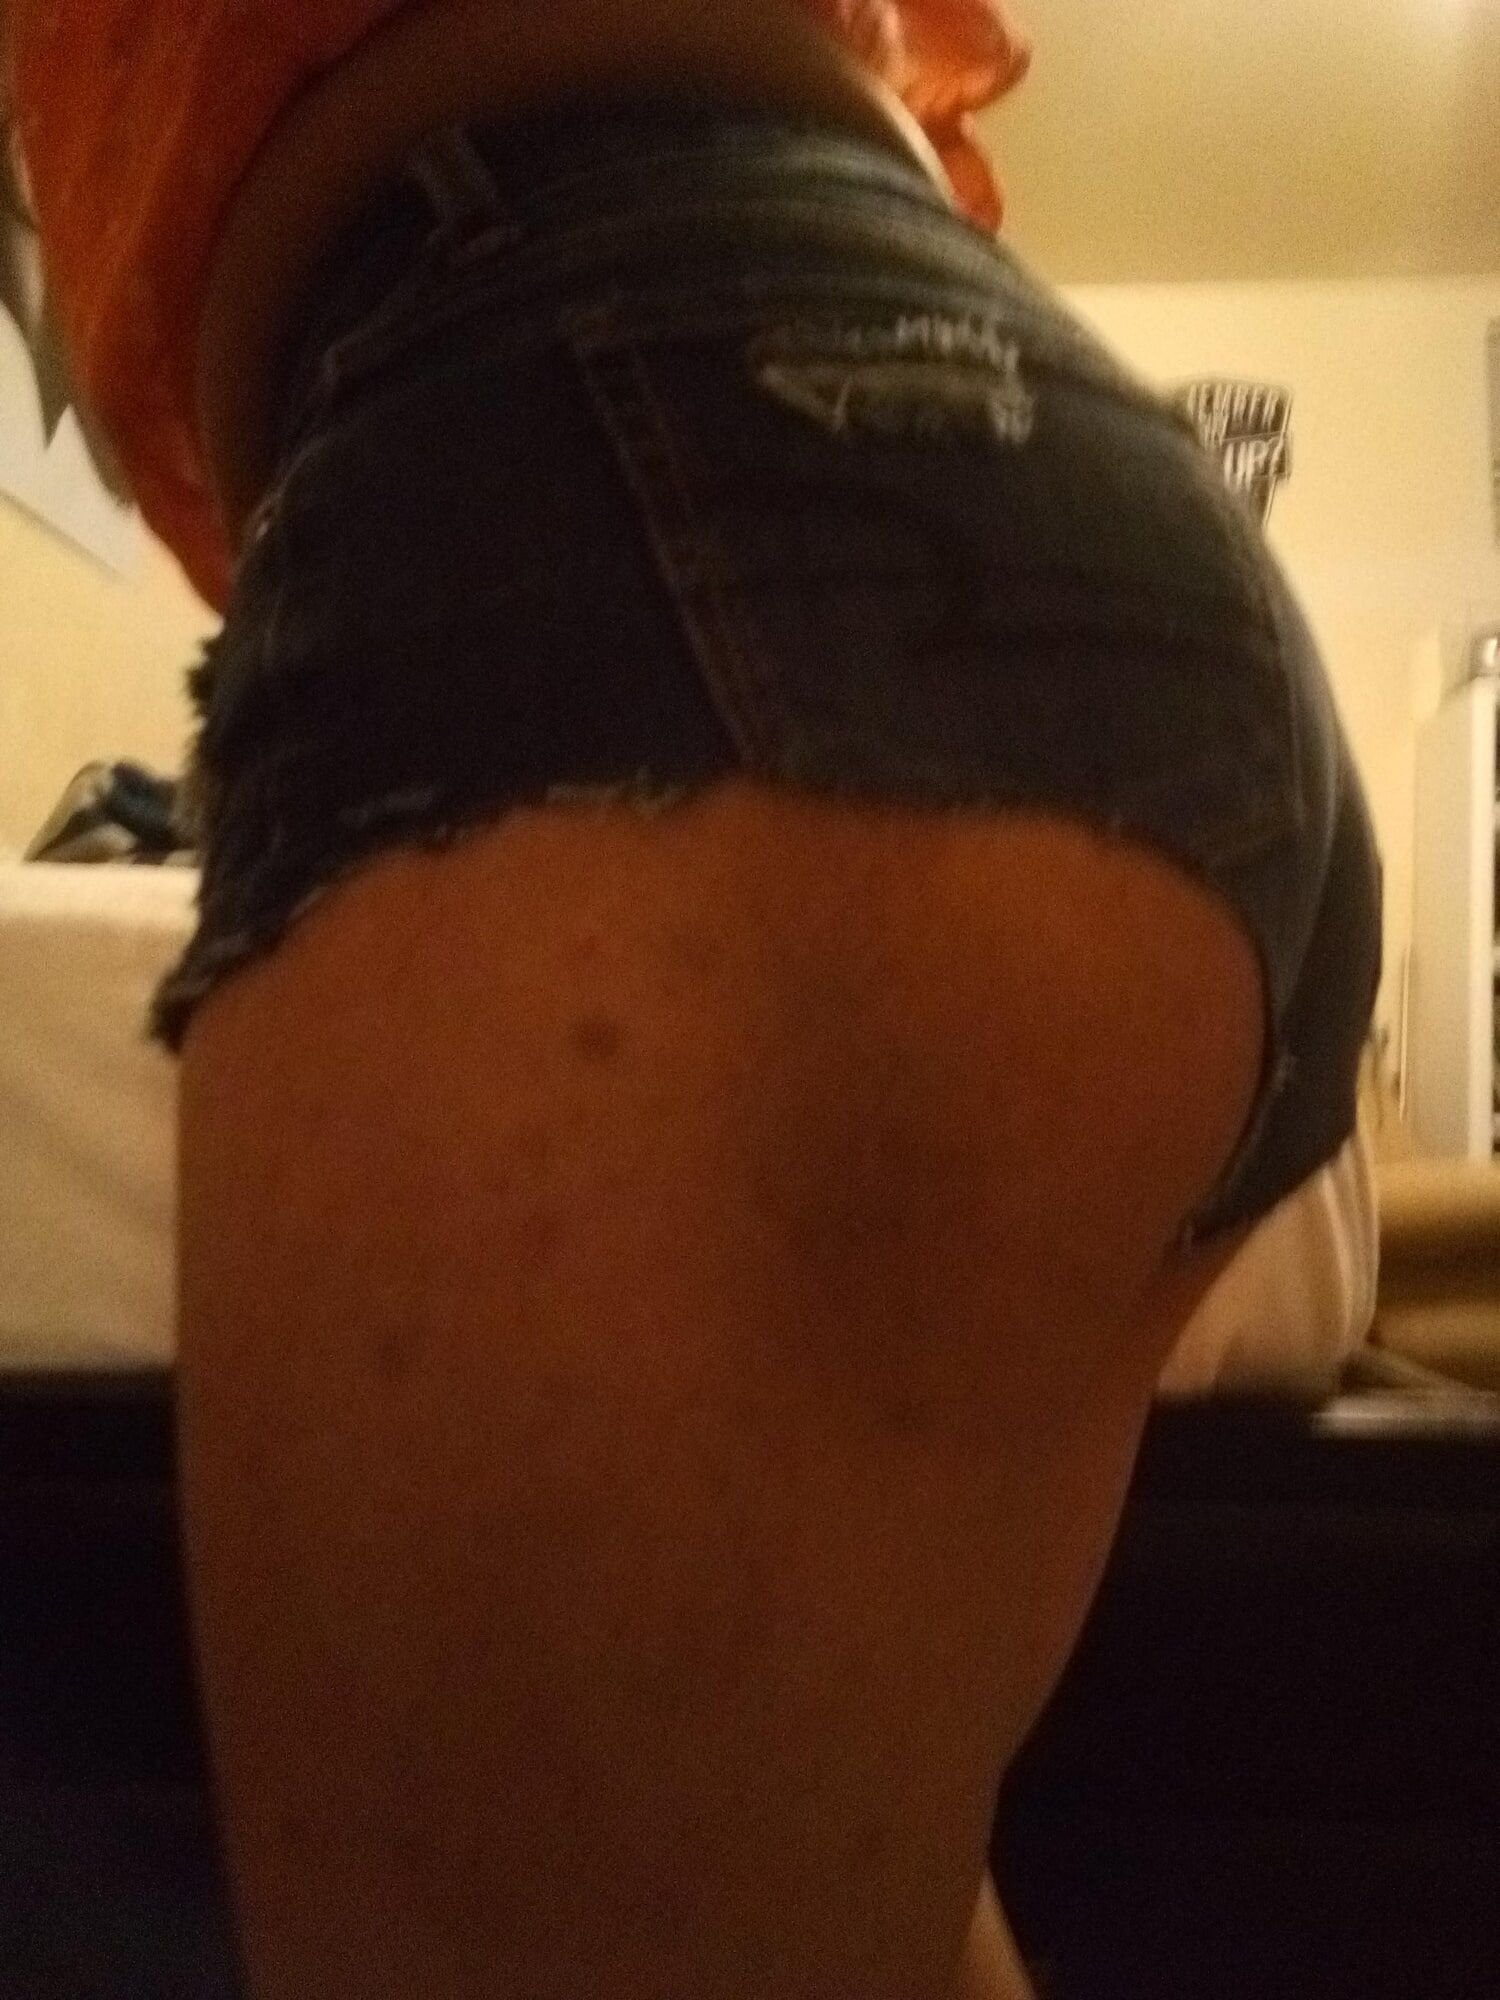 Just more of me in panties and booty shorts  #4